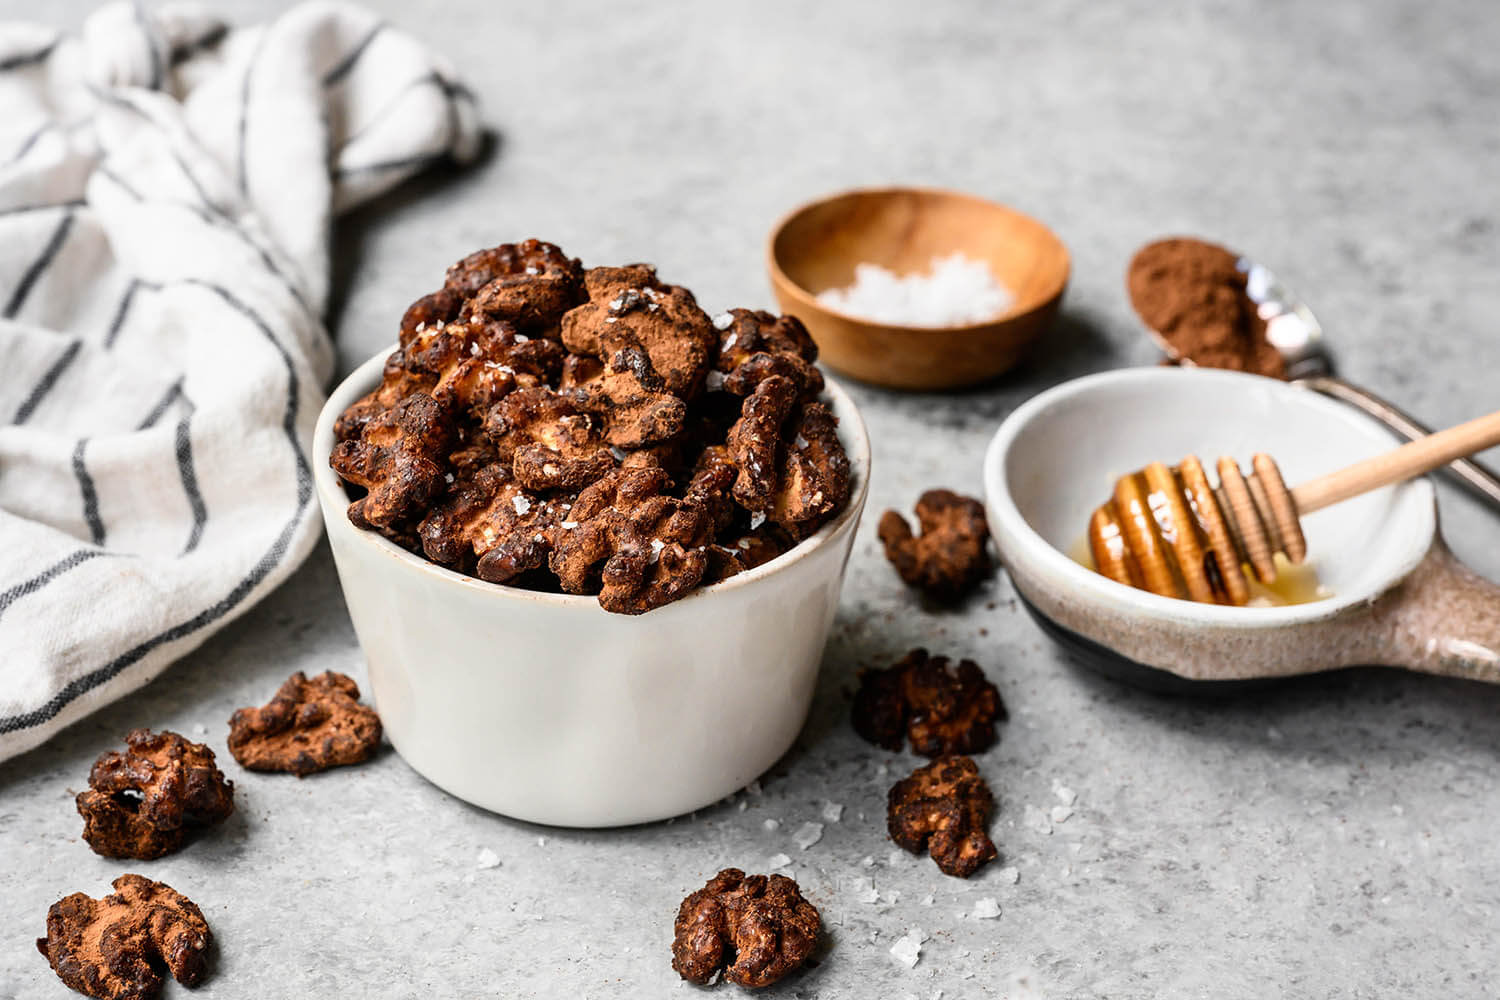 Making Everyday Healthy with Walnuts